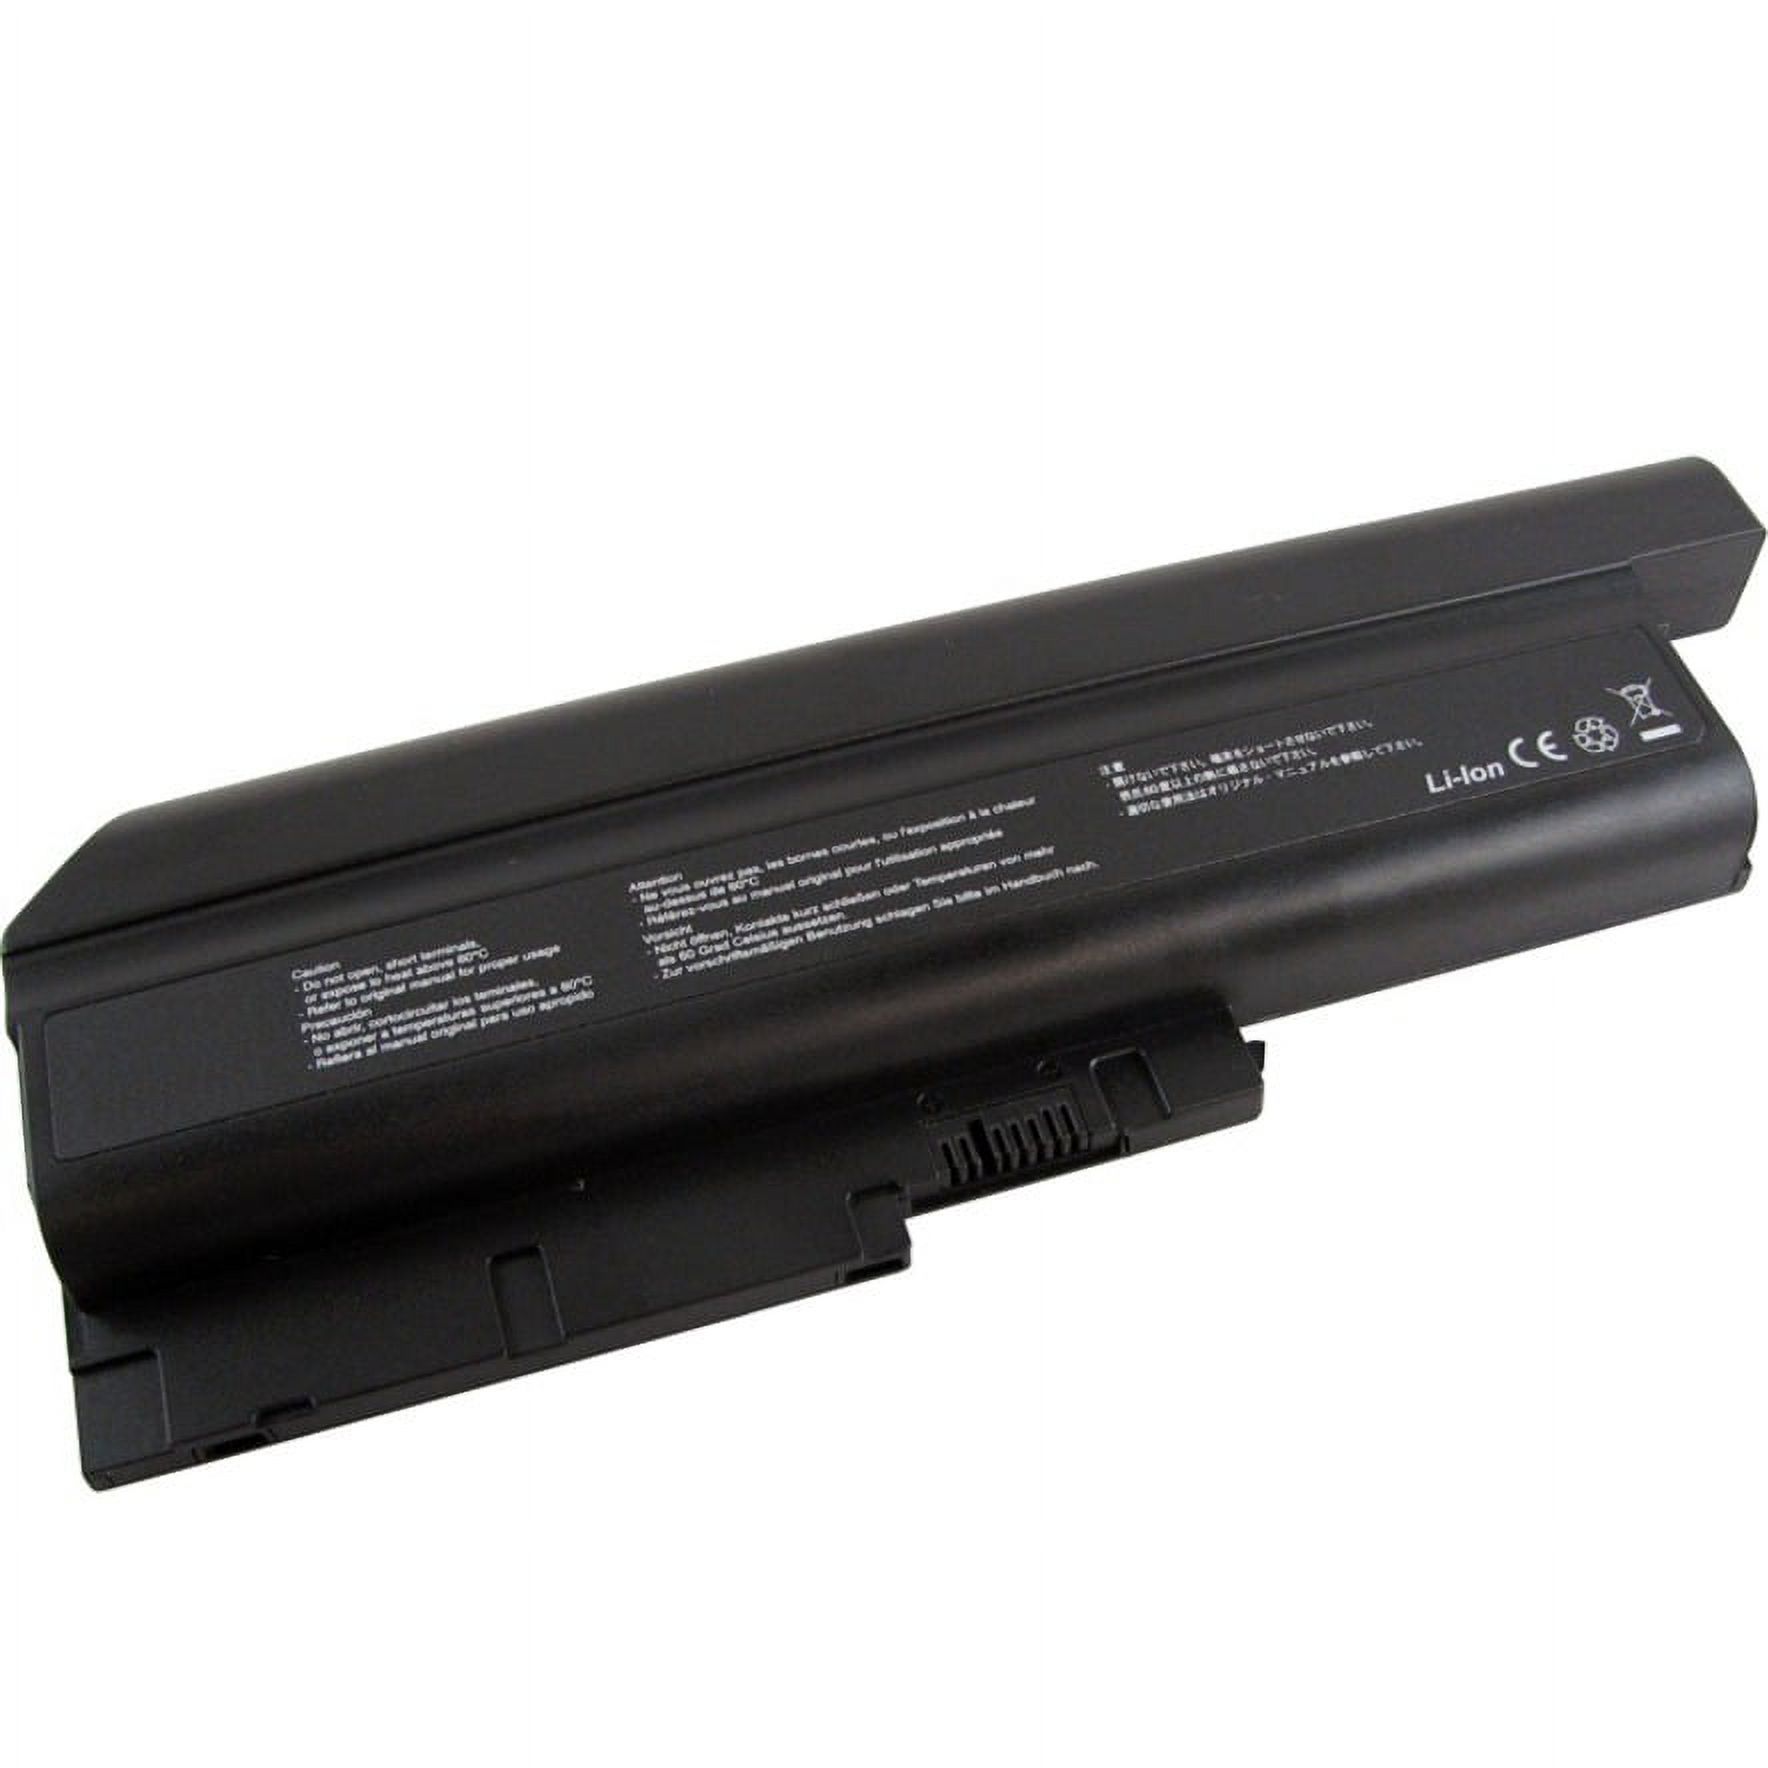 V7 Replacement Battery LENOVO IBM THINKPAD T60 R60 Z60M SERIES OEM# 42T4511 9 CELL - image 1 of 2